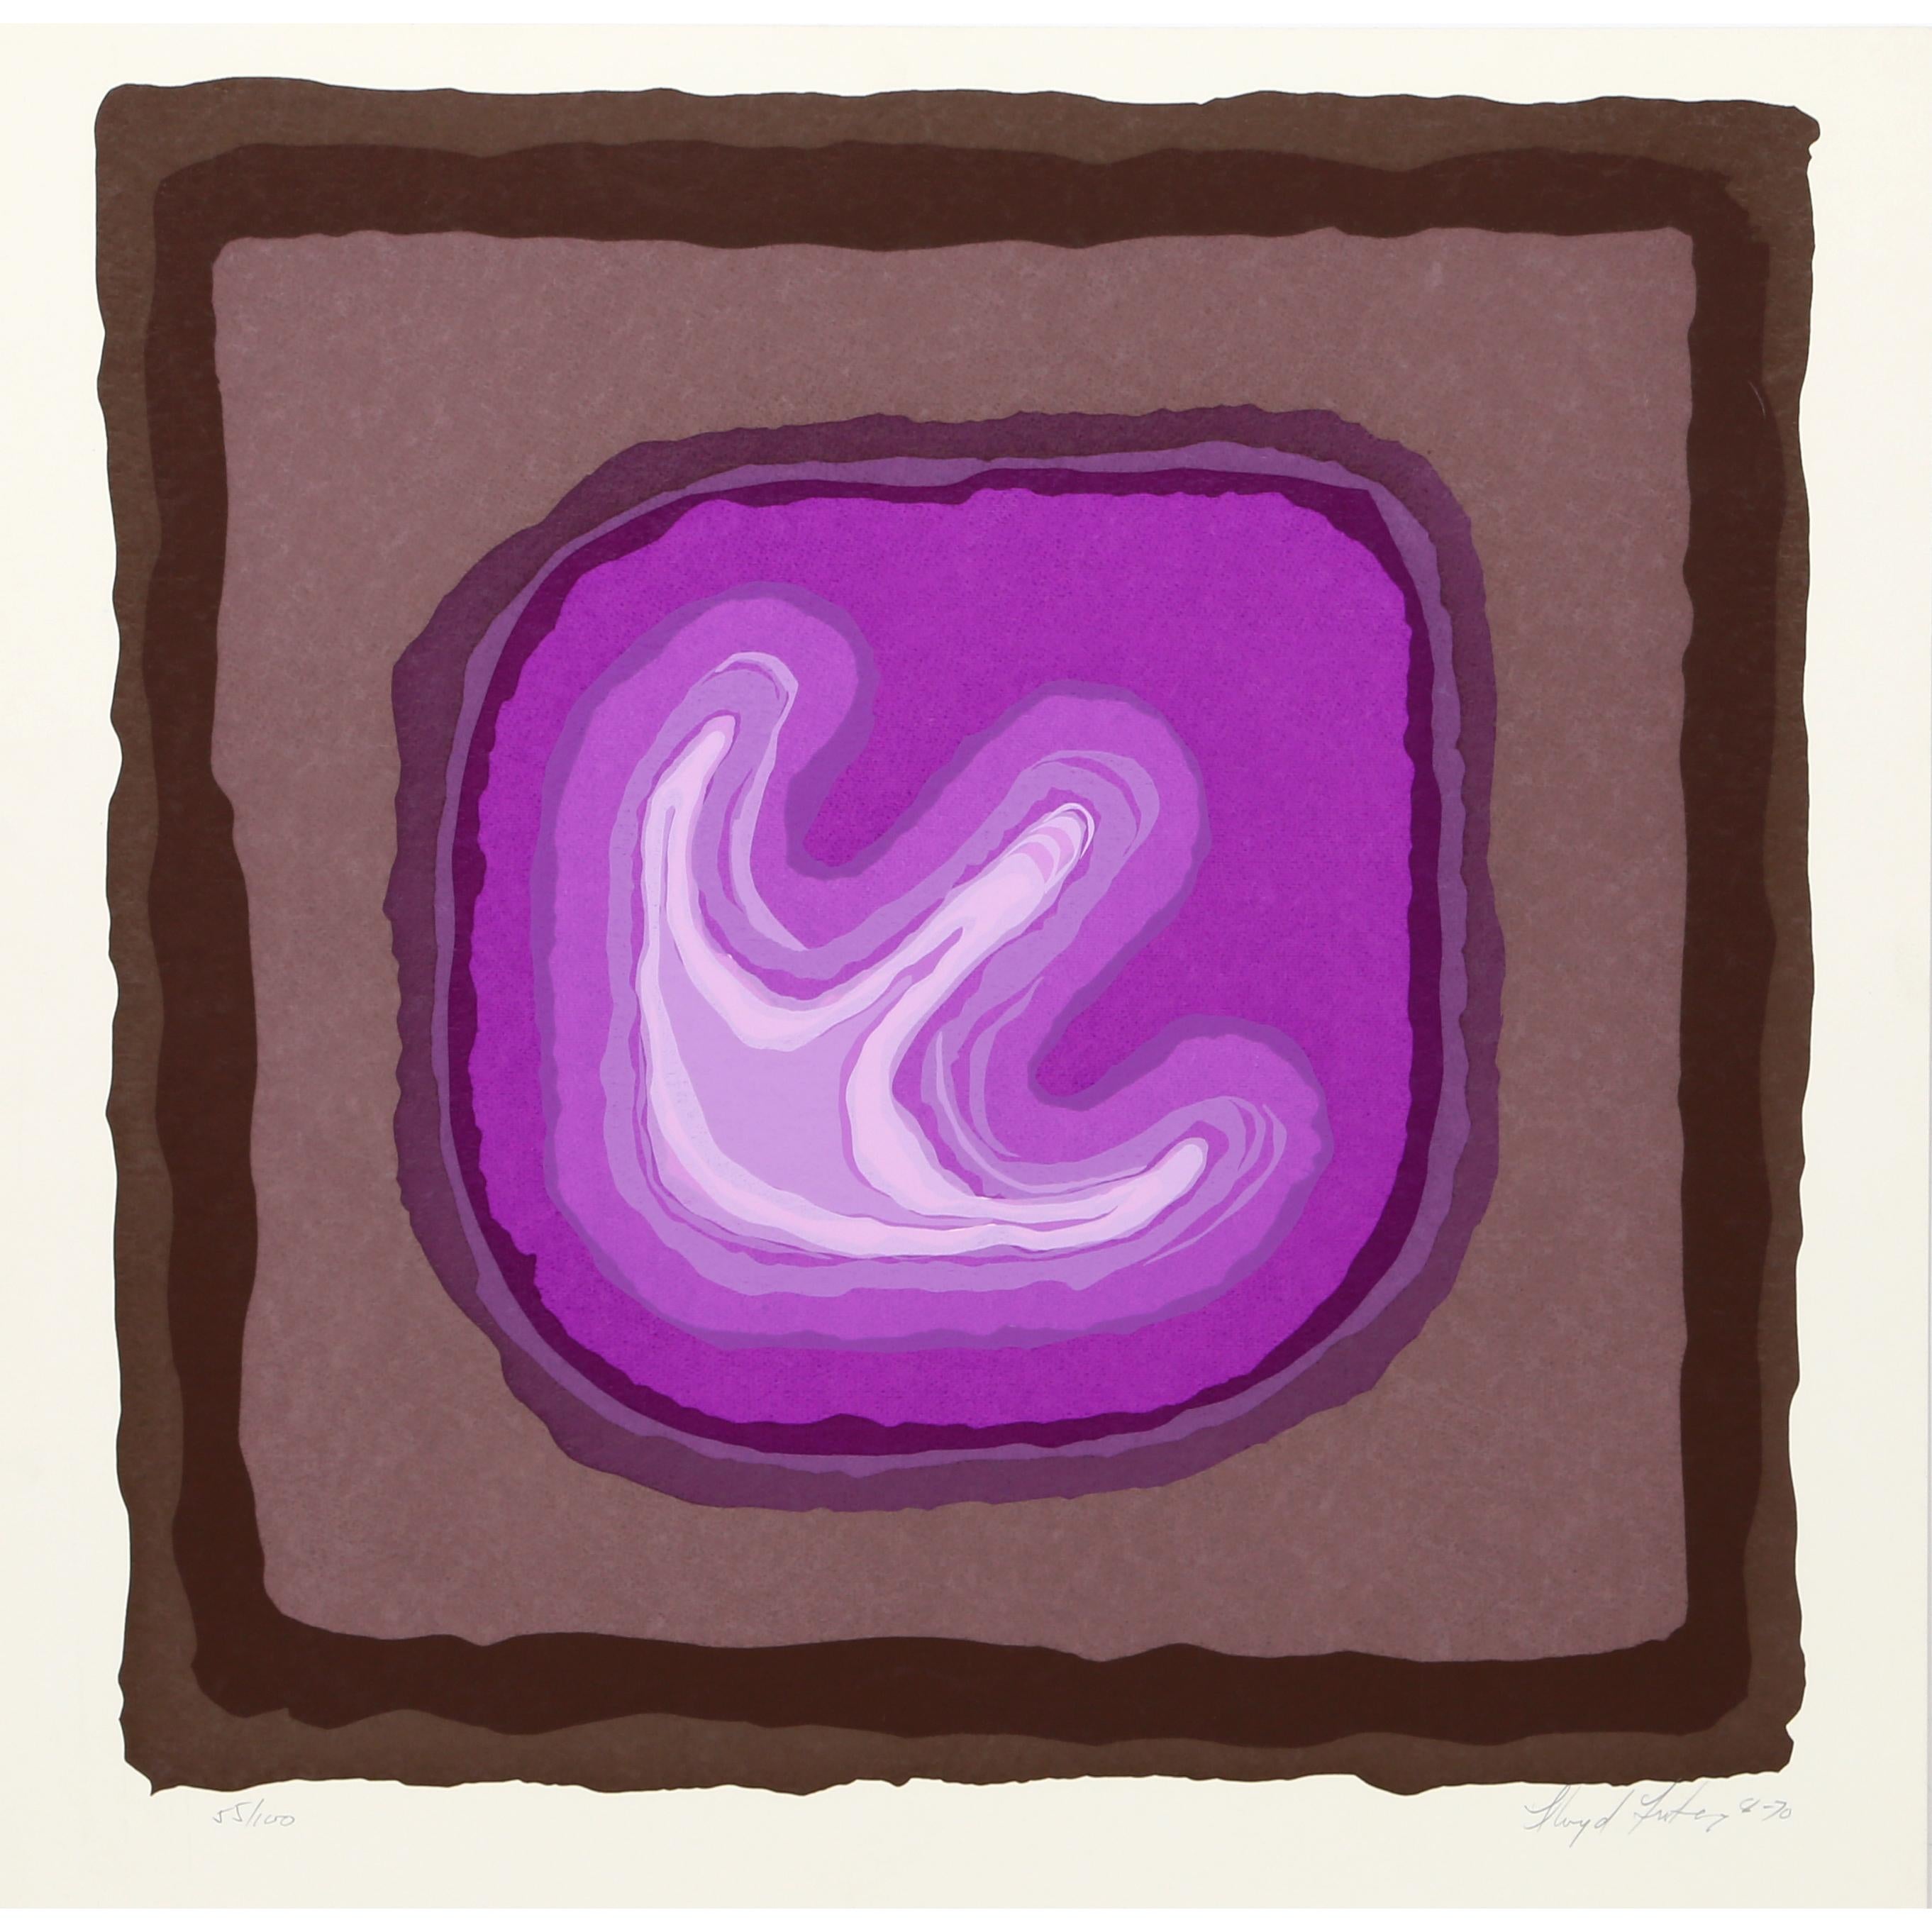 Artist: Lloyd Fertig, American (1943 - 1995)
Title: Untitled - Purple Abstract
Year: 1970
Medium: Serigraph, signed and numbered in pencil
Edition: 100
Size: 22 in. x 22 in. (55.88 cm x 55.88 cm)